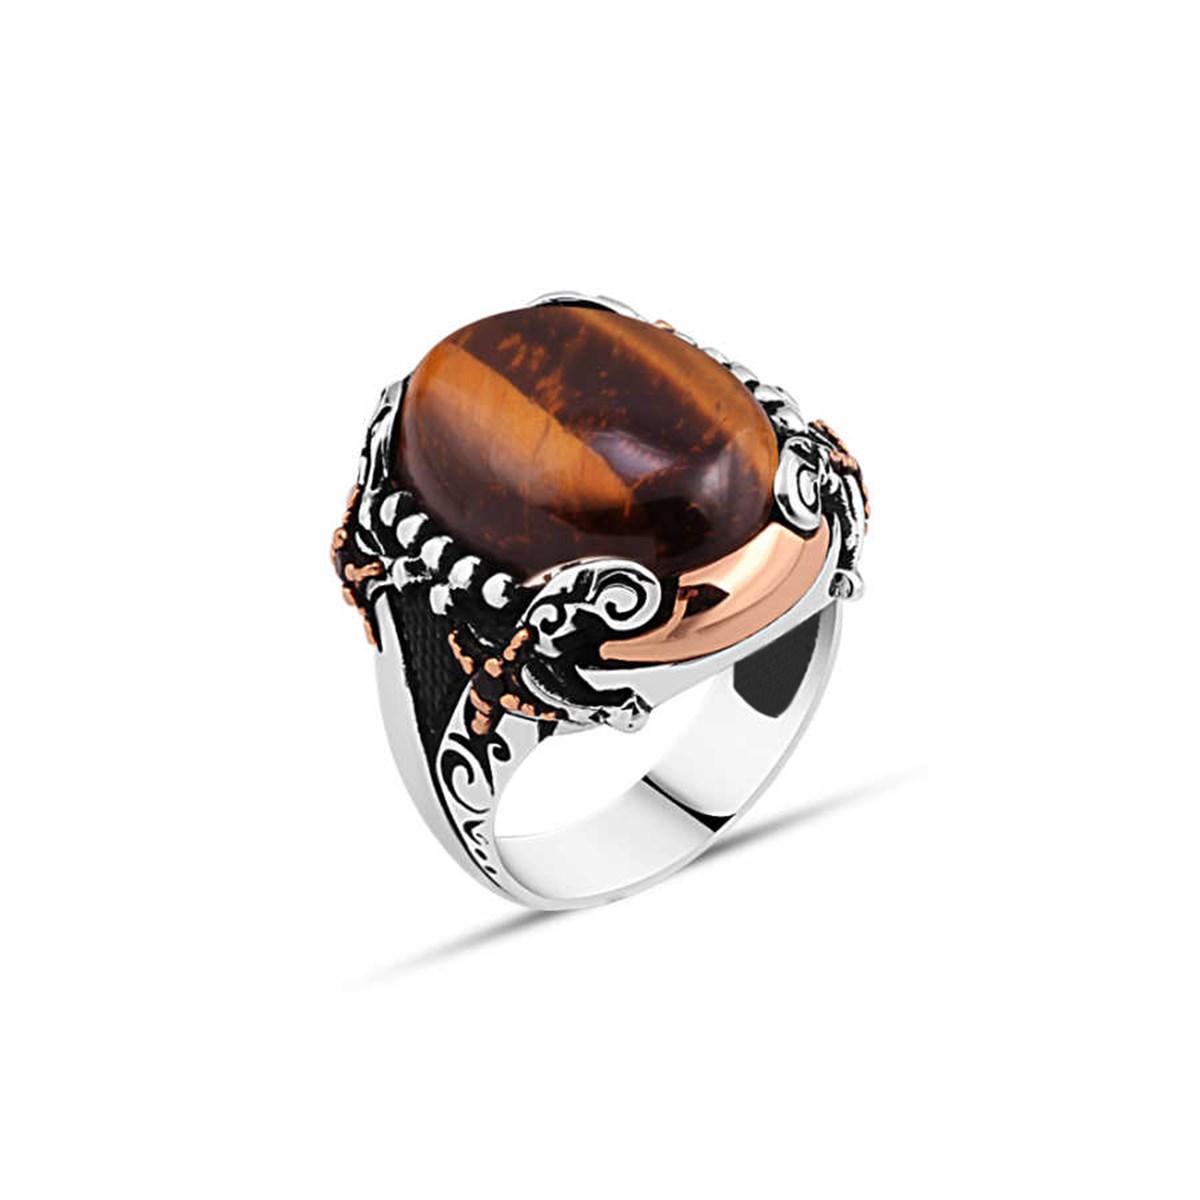 Hooded Tiger's Eye Sterling Silver Men's Ring with Sword Edges